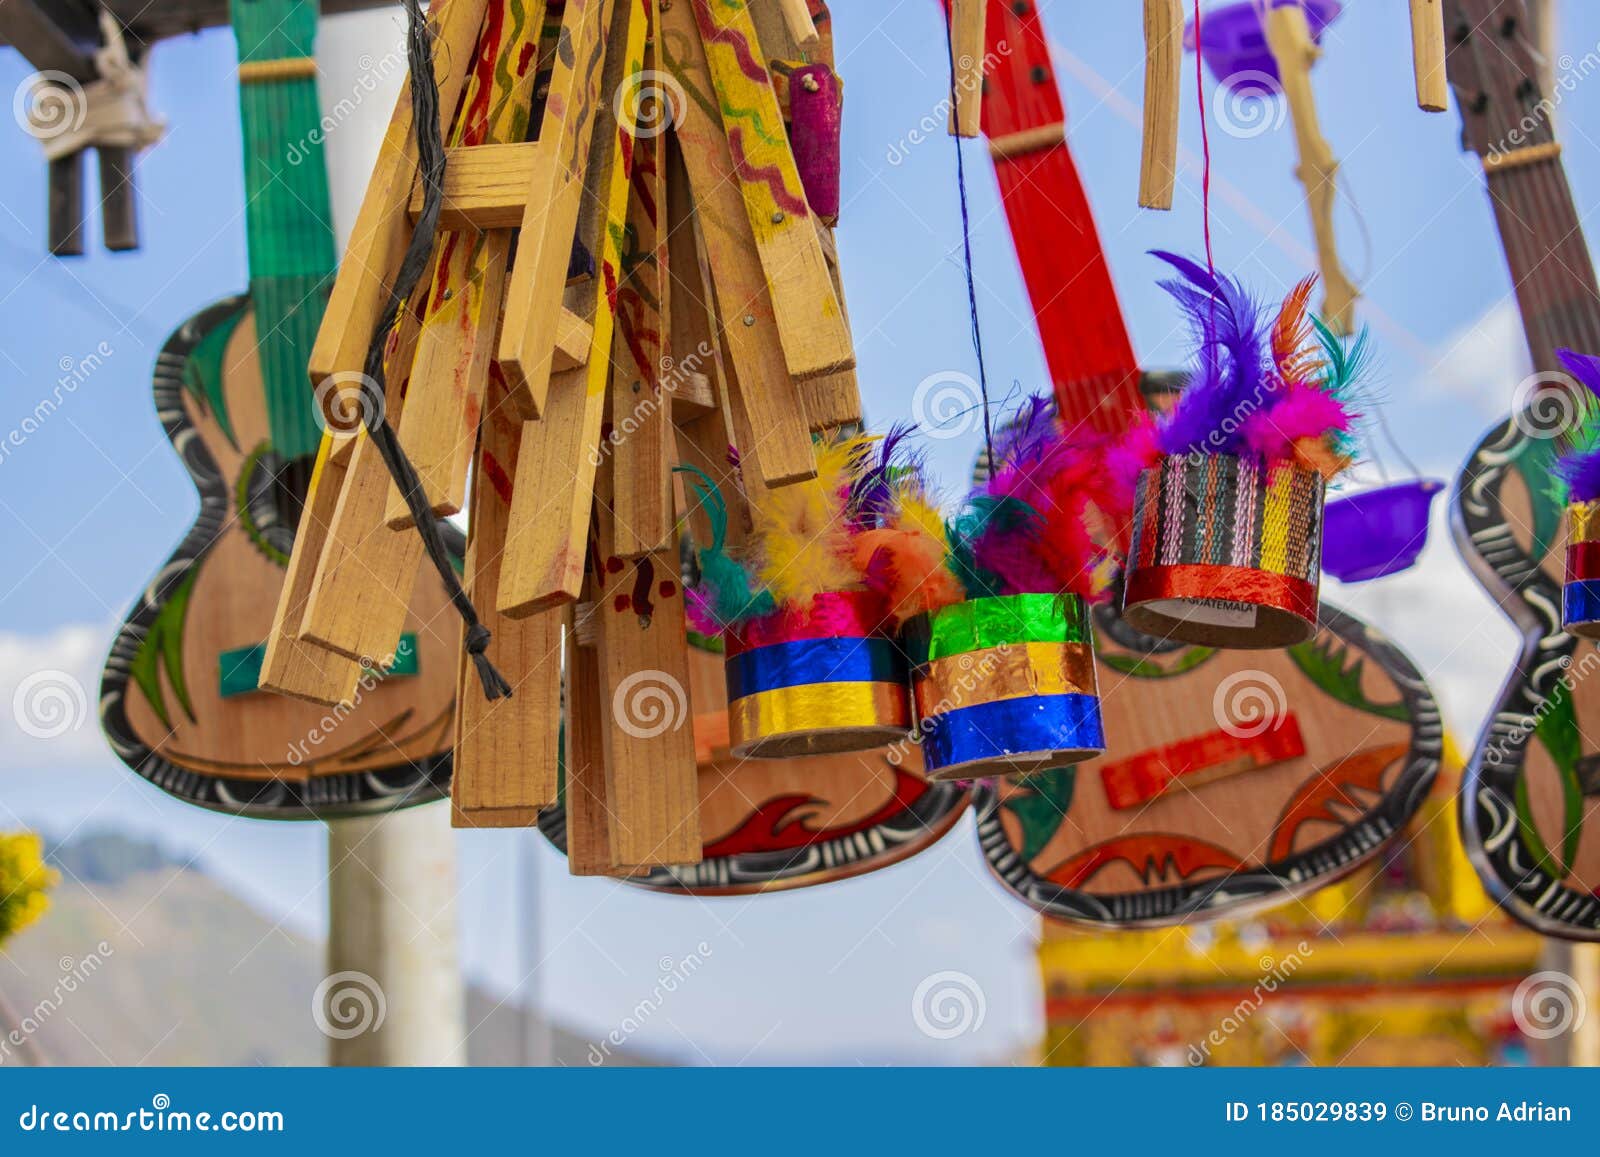 wood painted in colors with colored feathers, and hanging guitars fair of san andres xecul